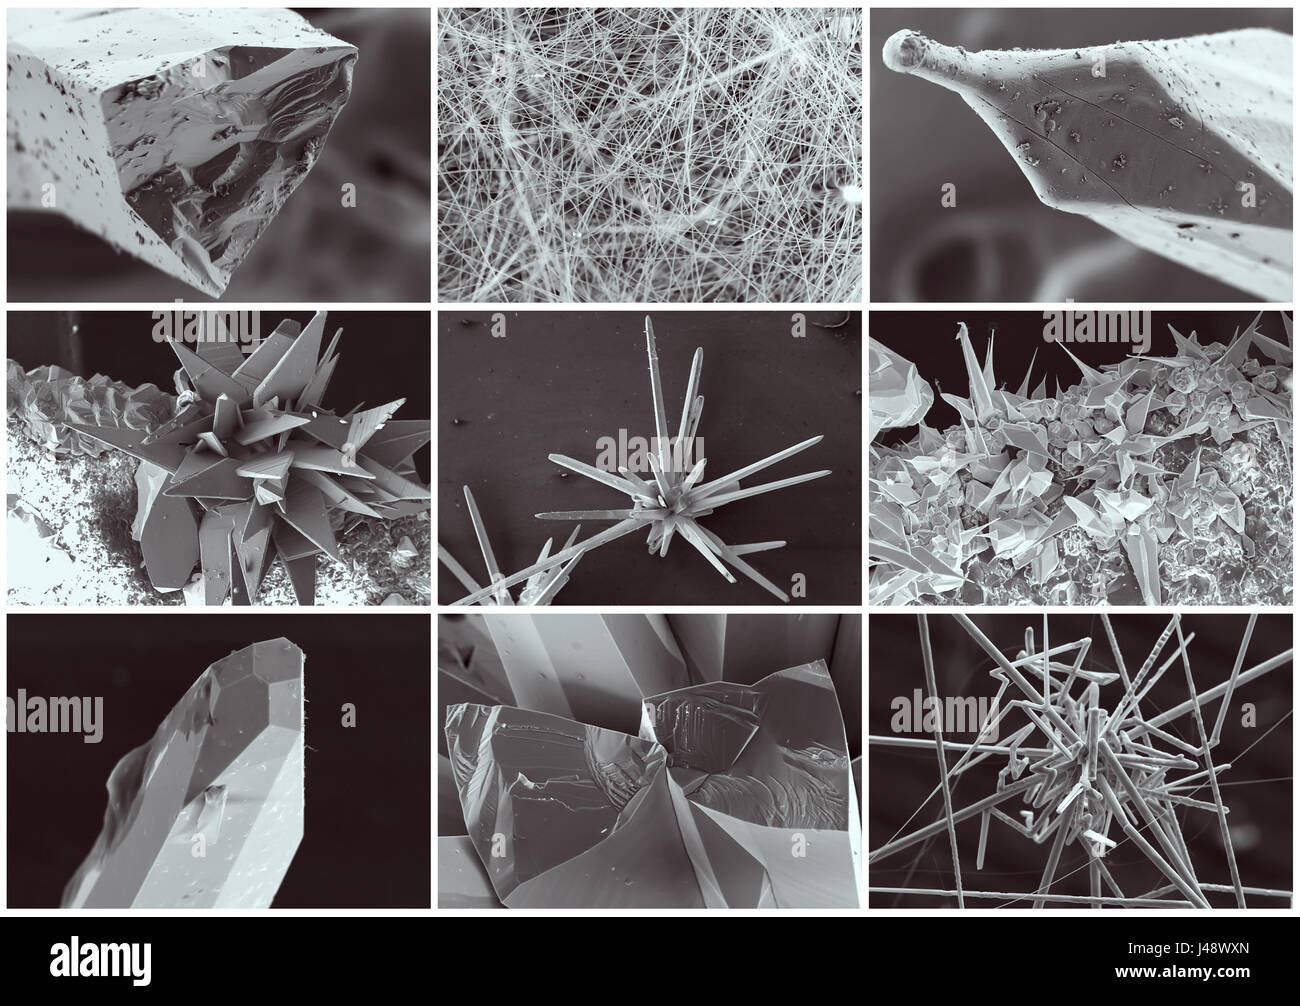 Nanotechnology collage. Crystal and whisker in microscope. Crystallization or solidification process view through the electron microscope with multipl Stock Photo